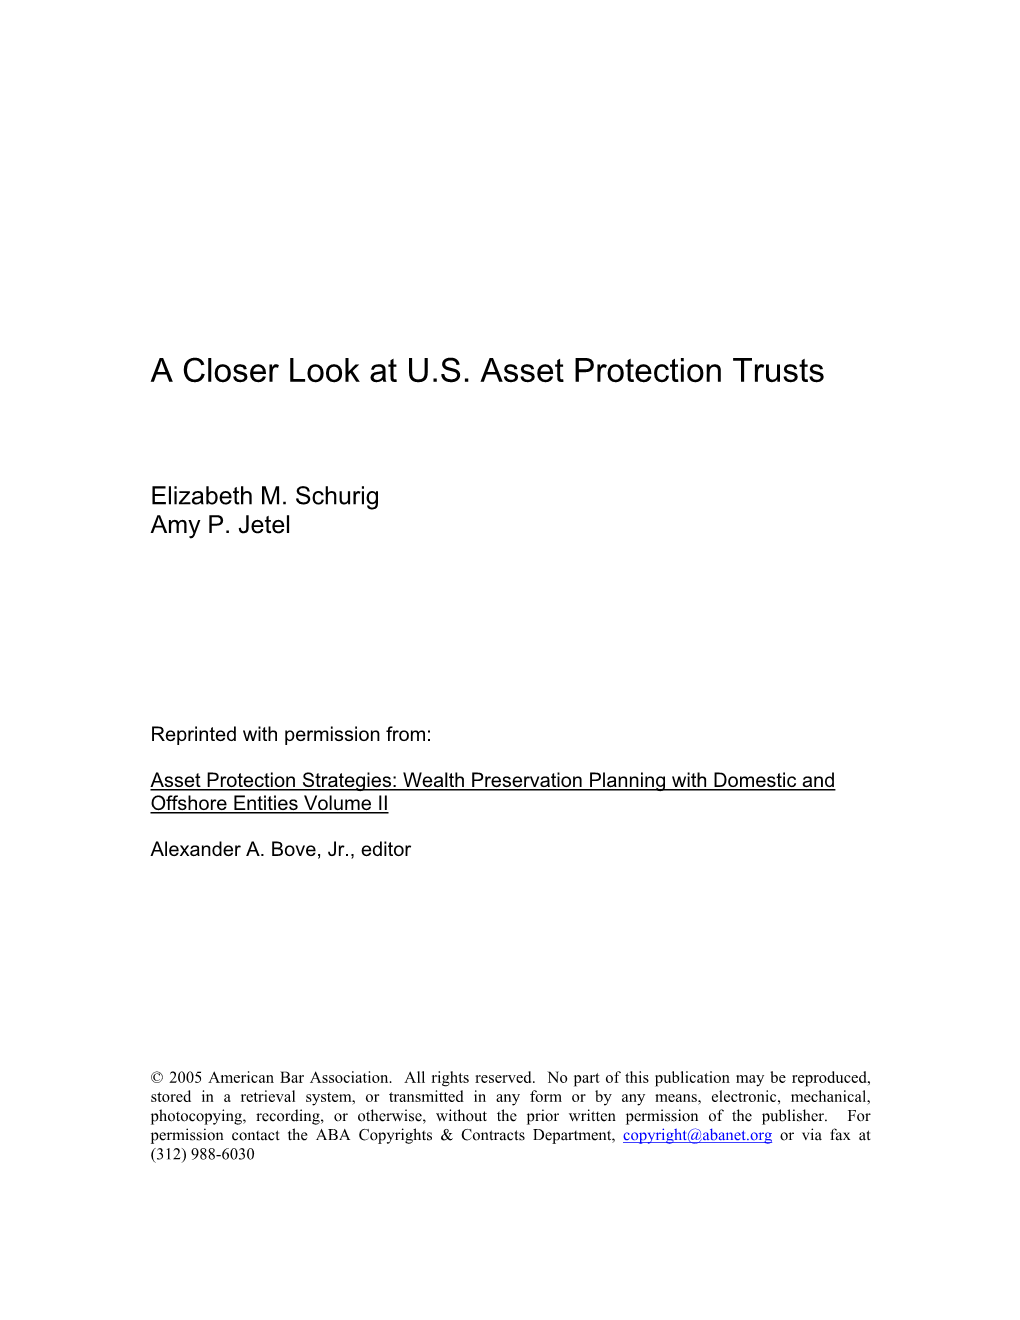 A Closer Look at U.S. Asset Protection Trusts